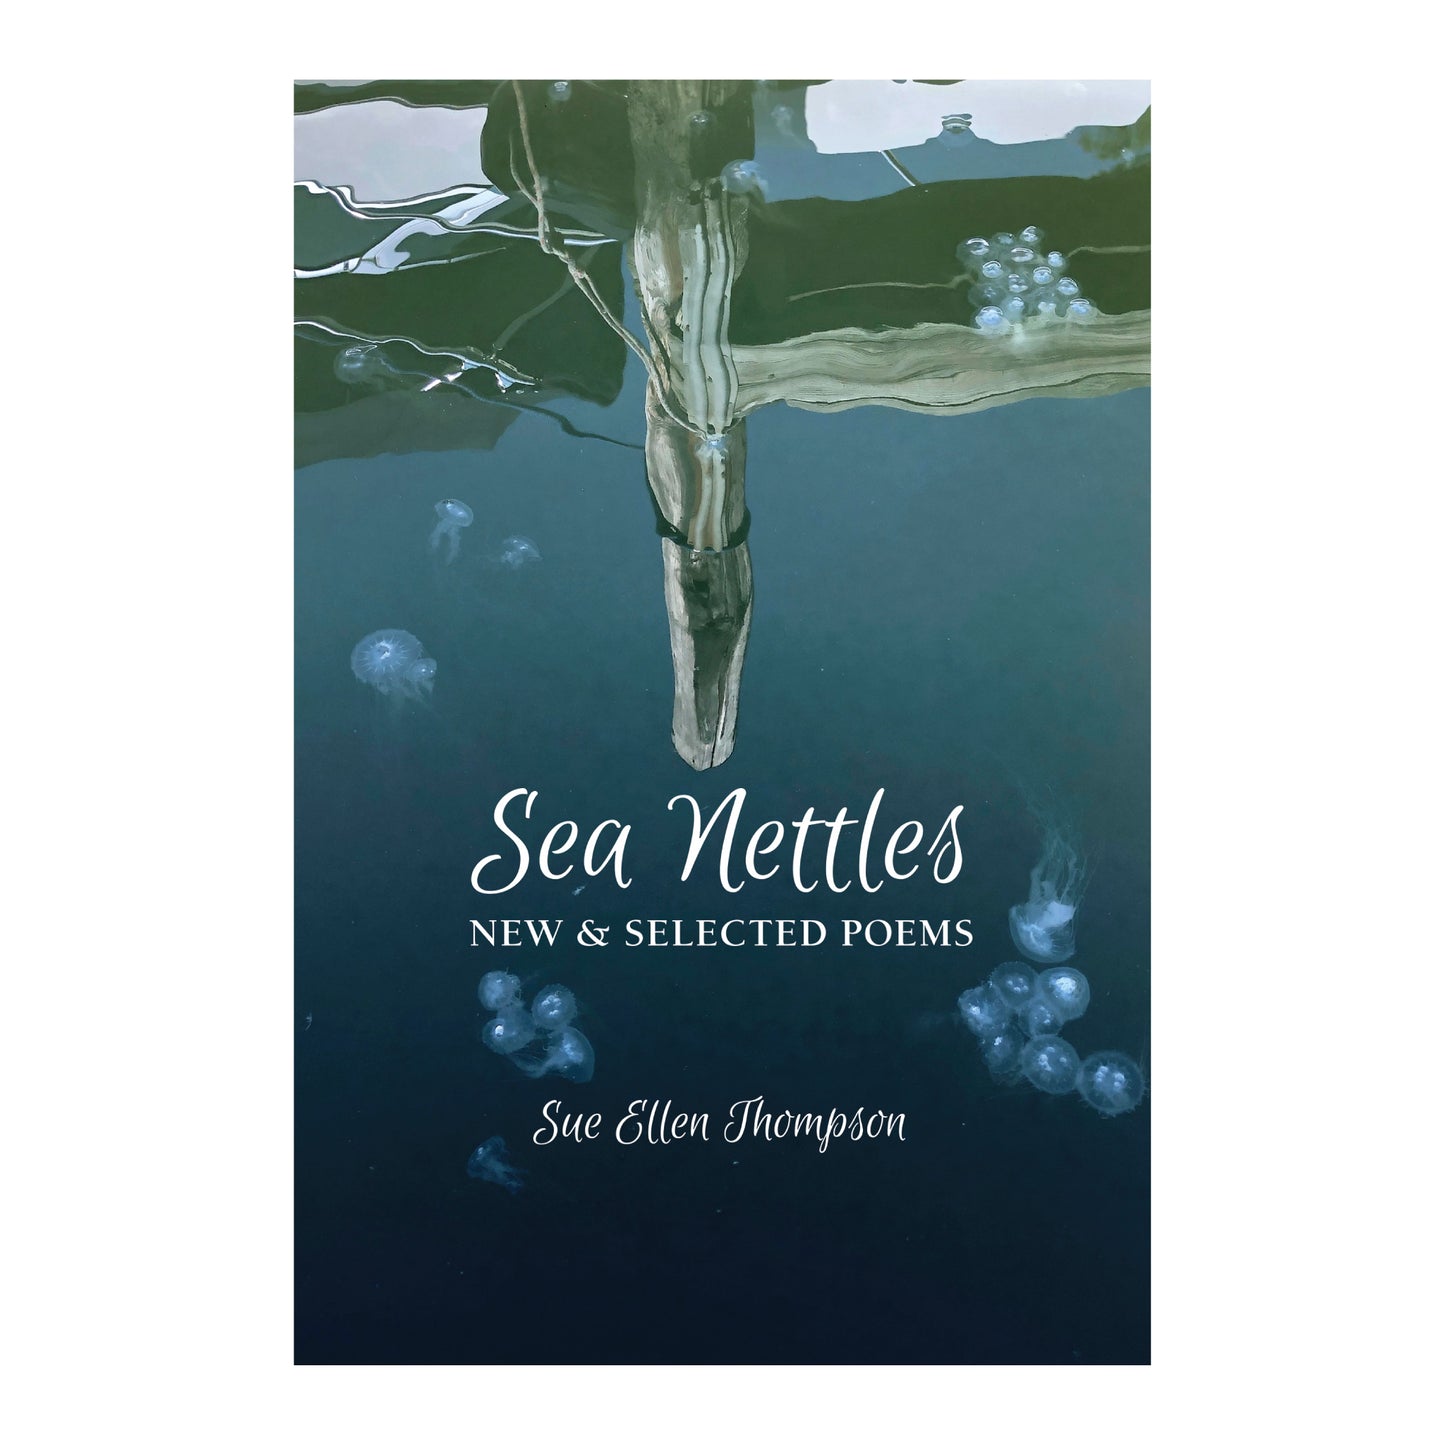 Sea Nettles: New & Selected Poems by Sue Ellen Thompson